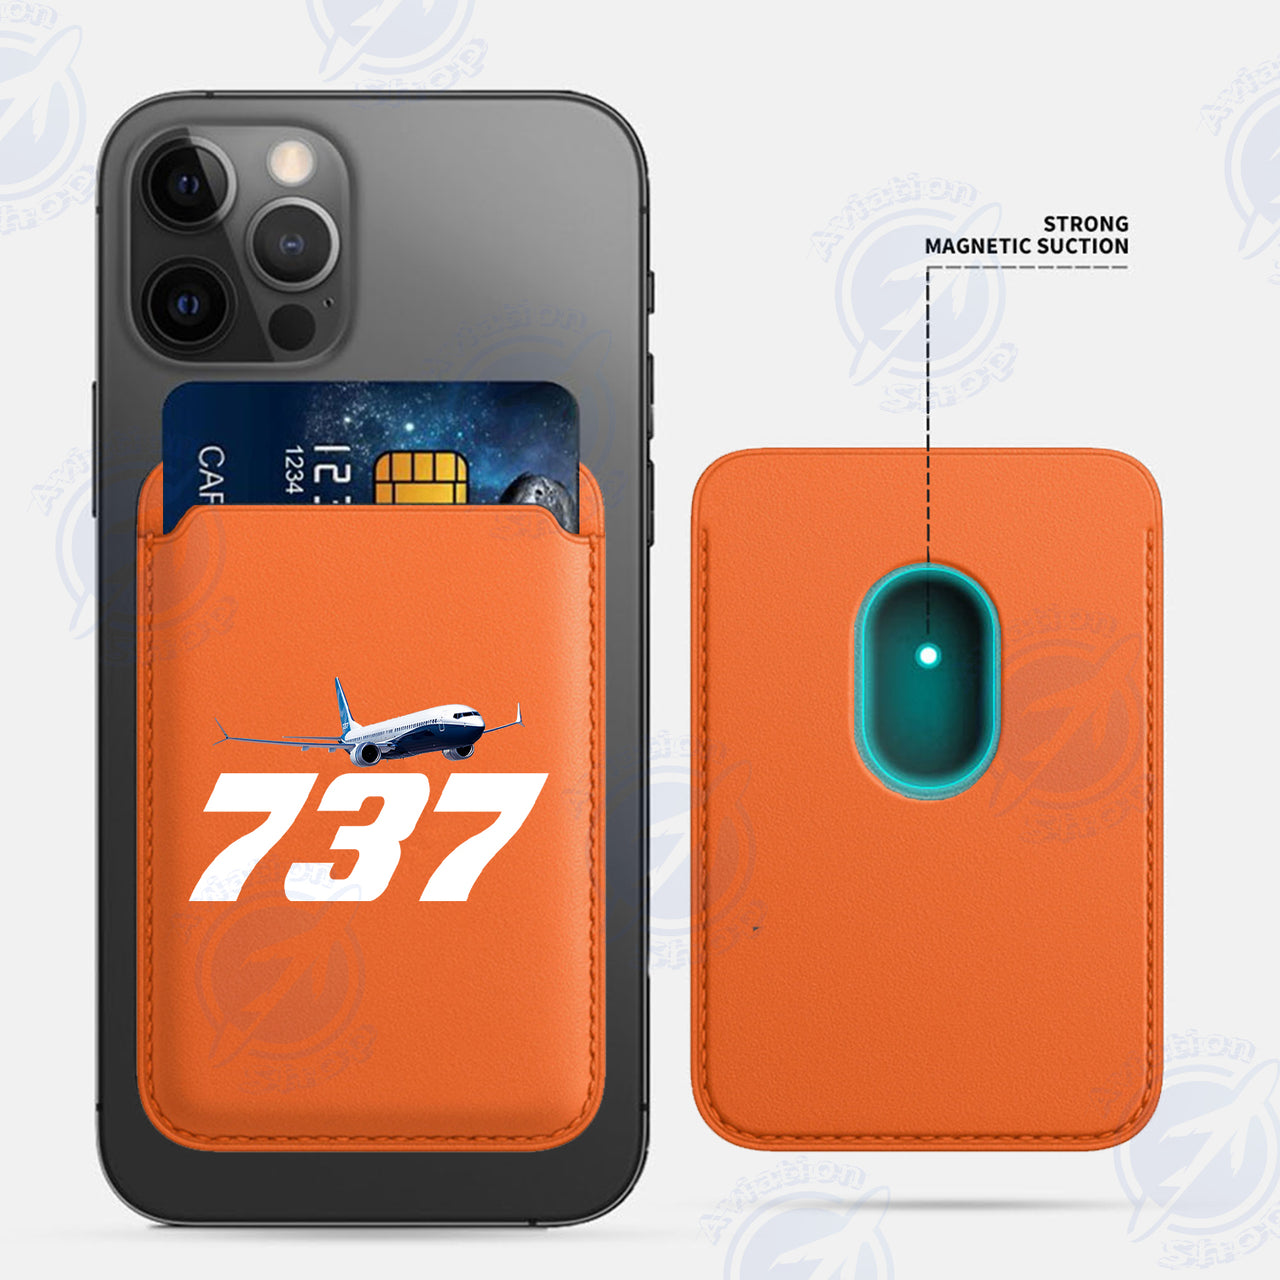 Super Boeing 737-800 iPhone Cases Magnetic Card Wallet